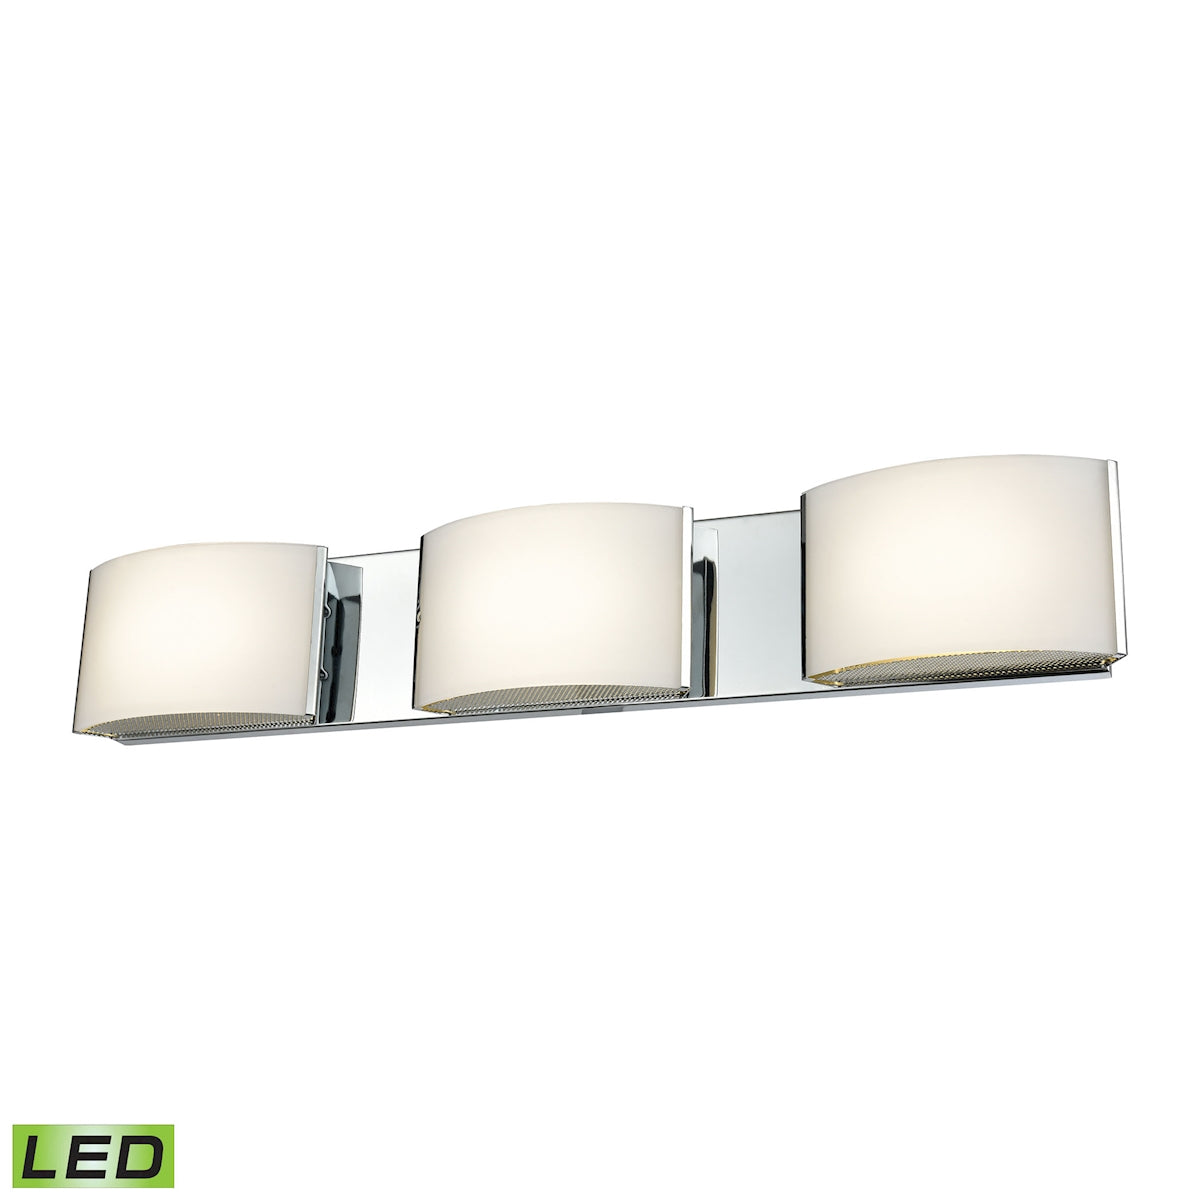 ELK Lighting BVL913-10-15 Pandora 3-Light Vanity Sconce in Chrome with Opal Glass - Integrated LED